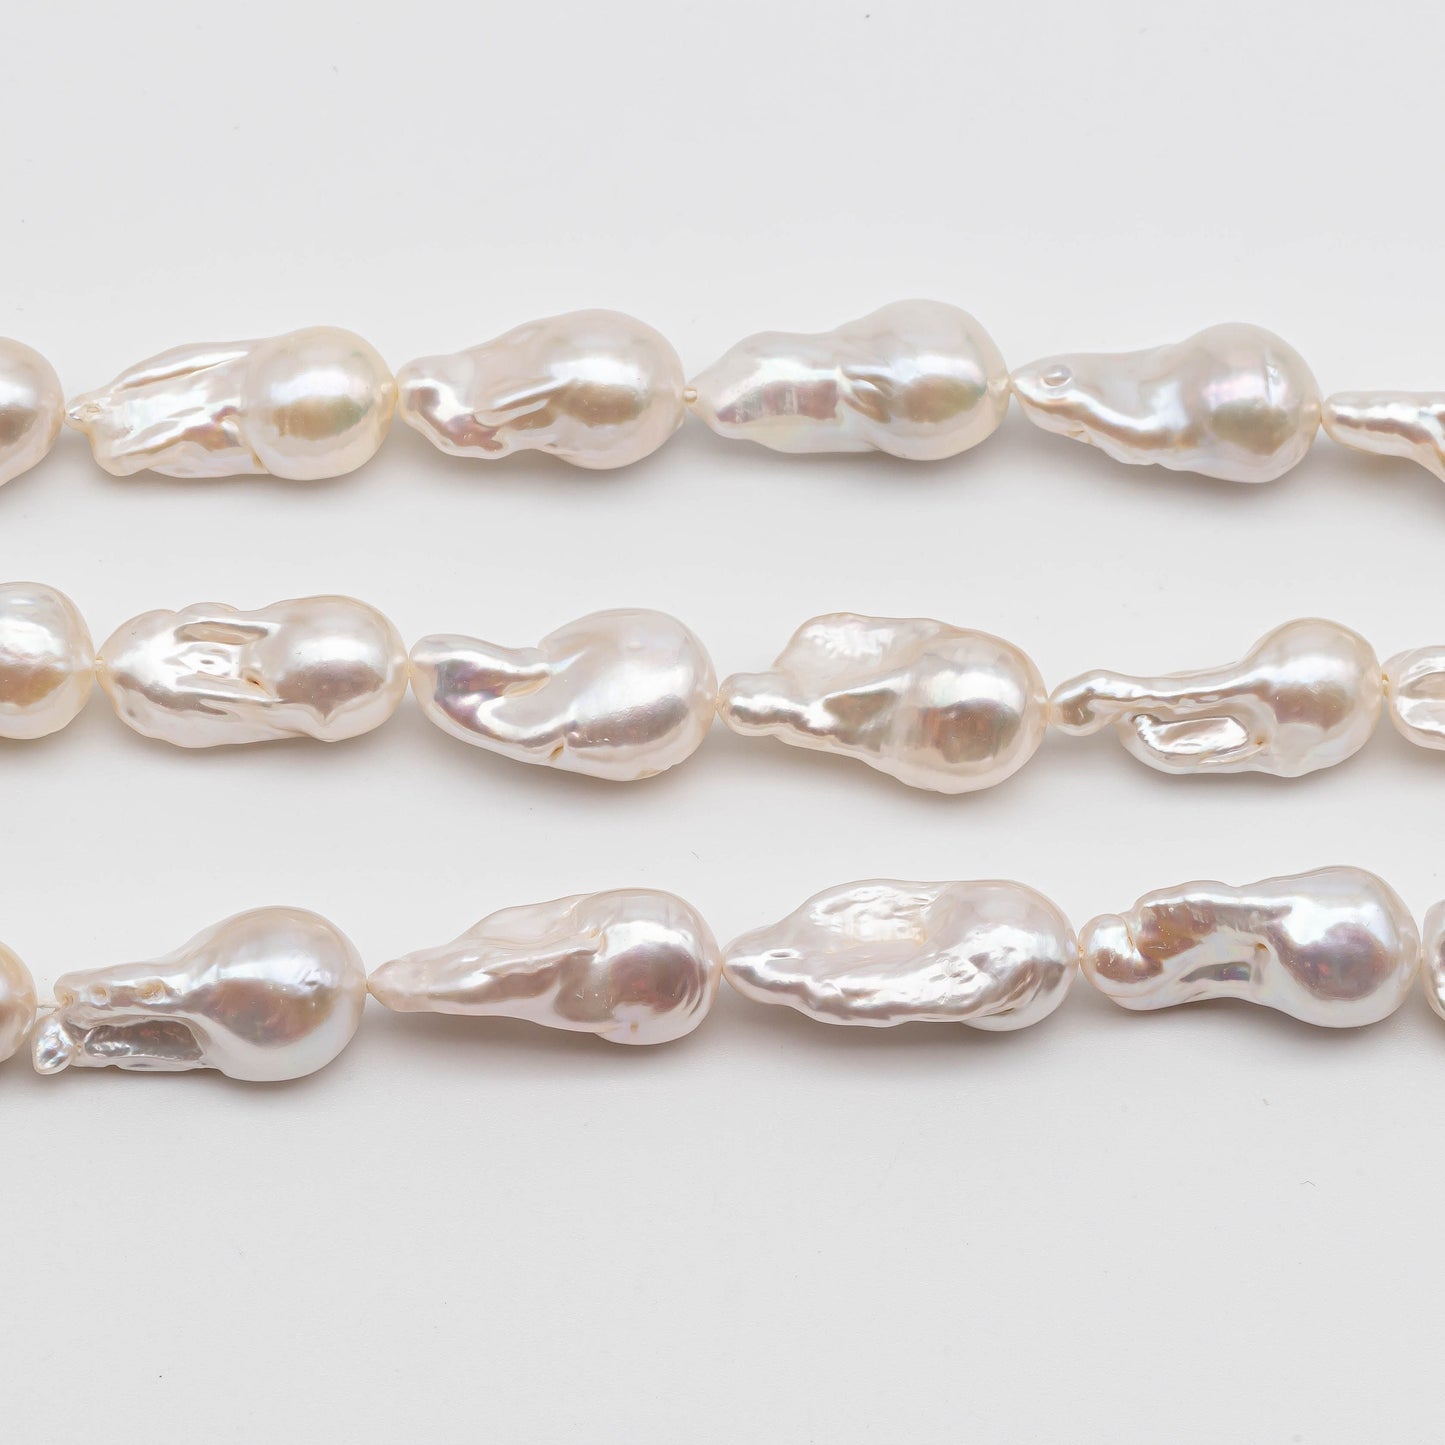 10-12mm Baroque Pearl Small Size Elongate Flameball Pearl Beads with Beautiful Luster, Difficult to Find Pieces, Full Strand, SKU# 1114BA